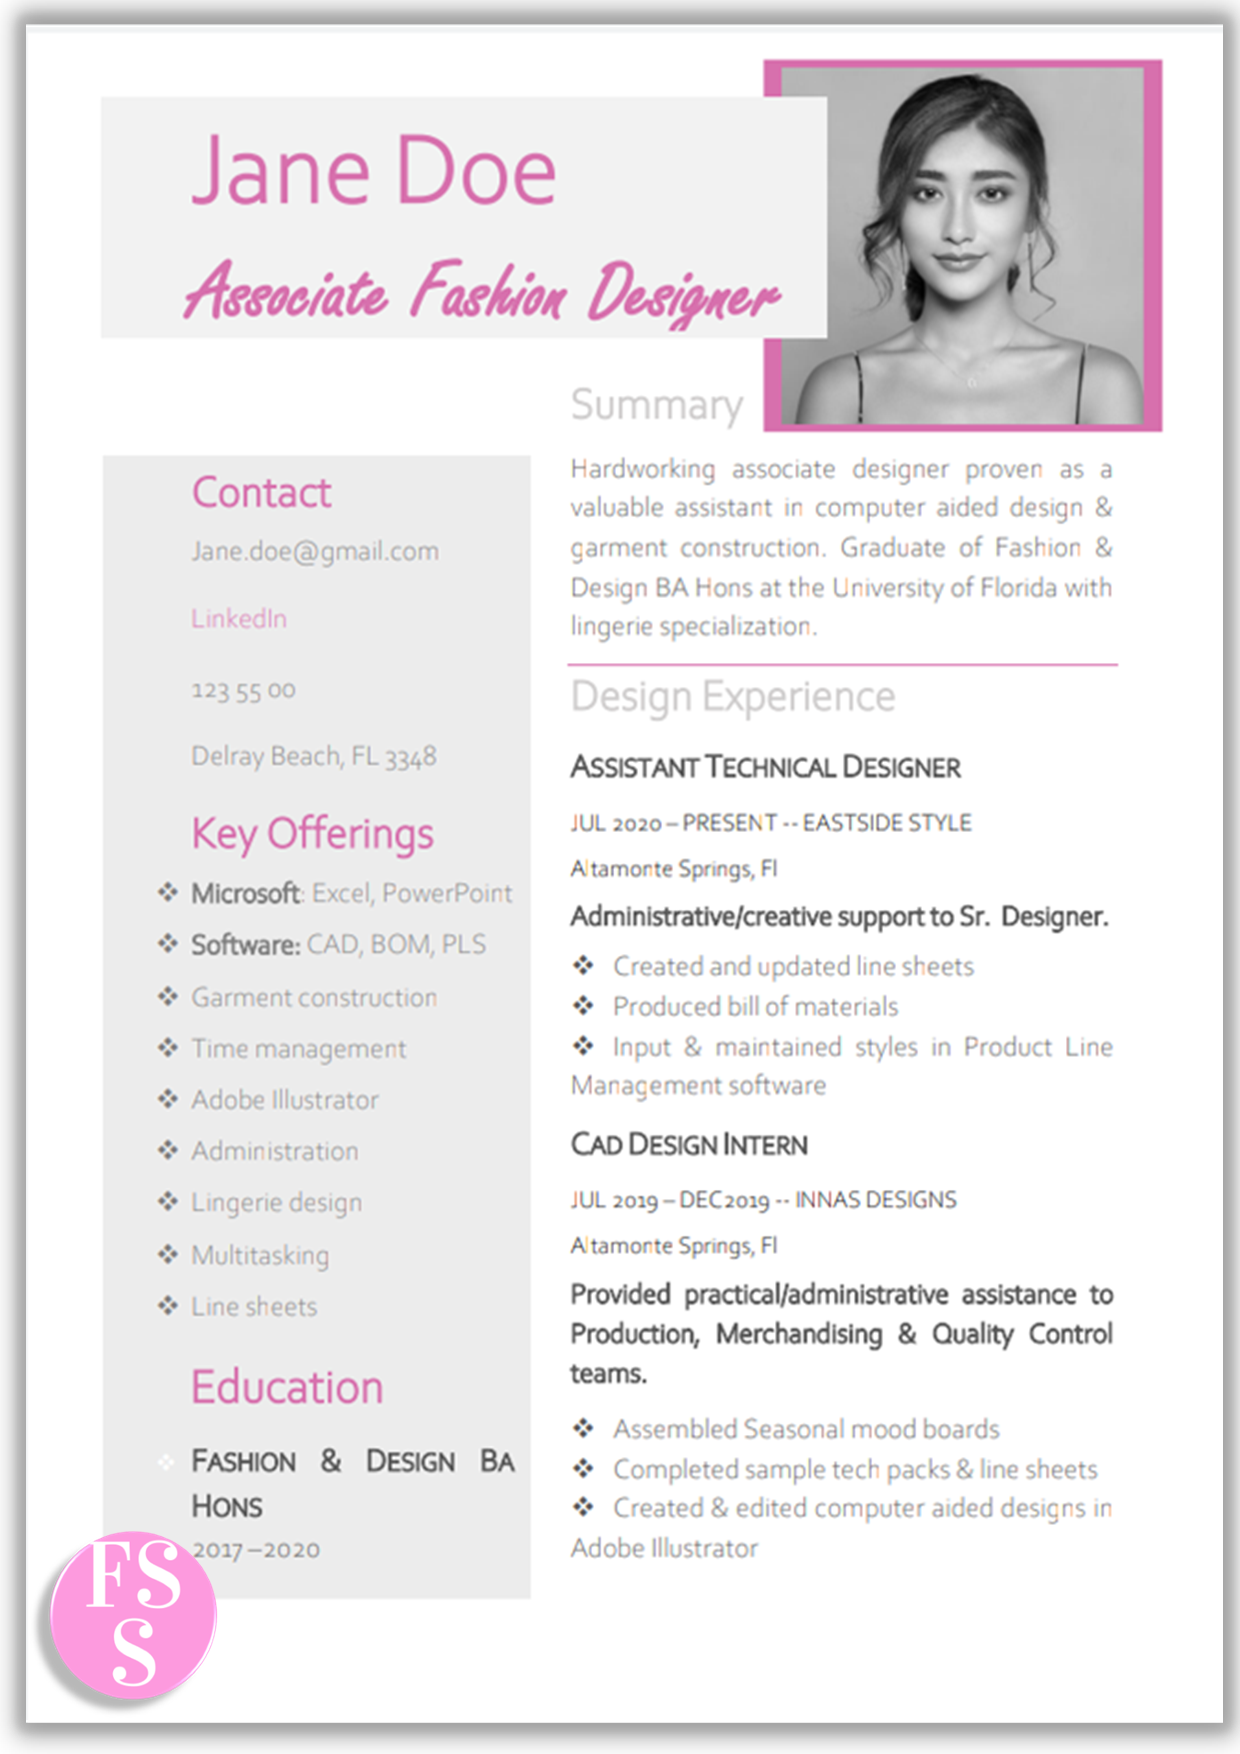 Beginner Fashion Designer Resume. Use this creative resume recommended by recruiters. For more entry level resume tips & templates visit our website.